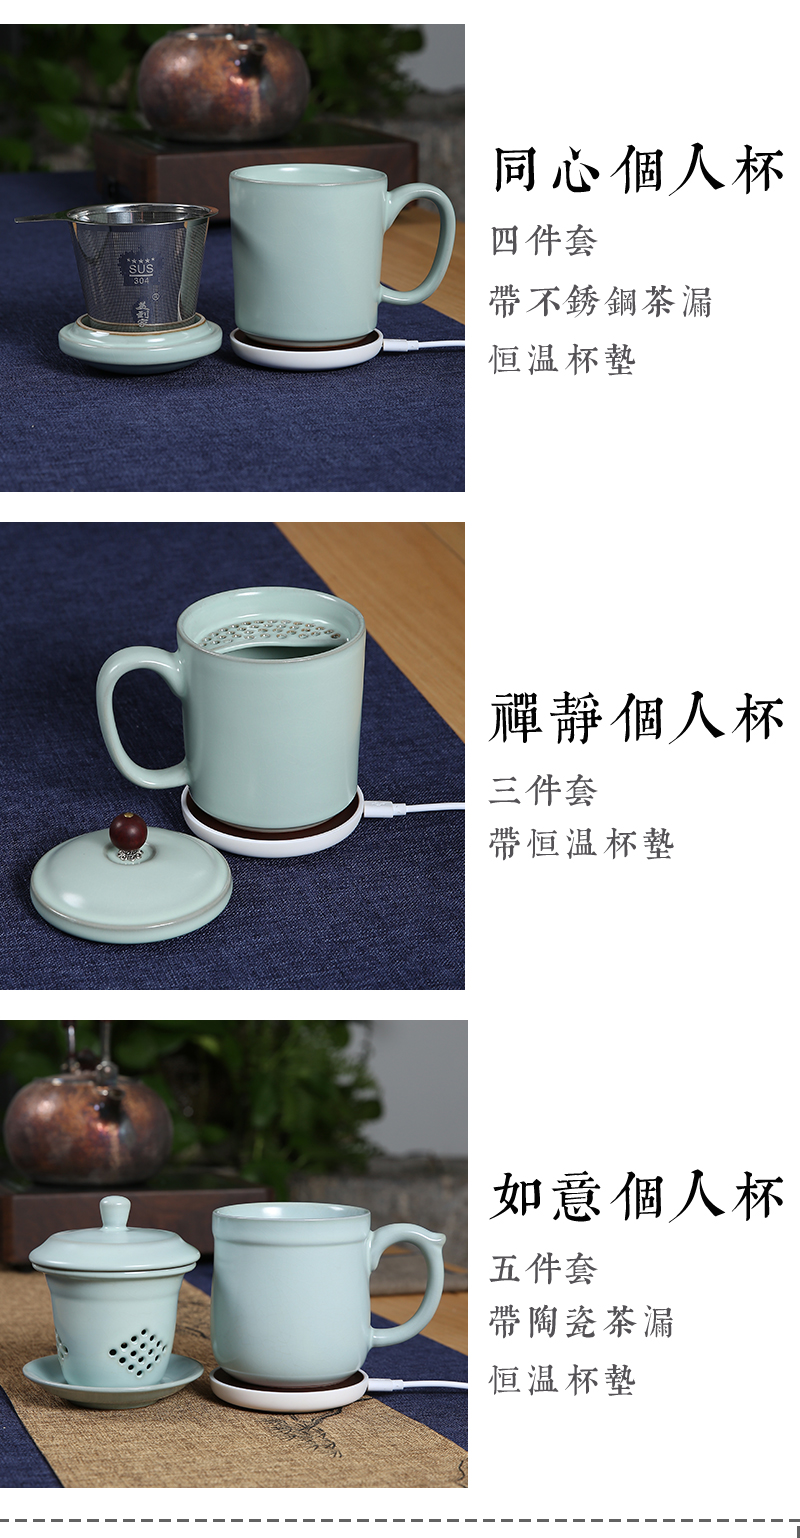 Your up office and glass ceramic cups with cover filter cup tea separation boss can support his family with a tea cup